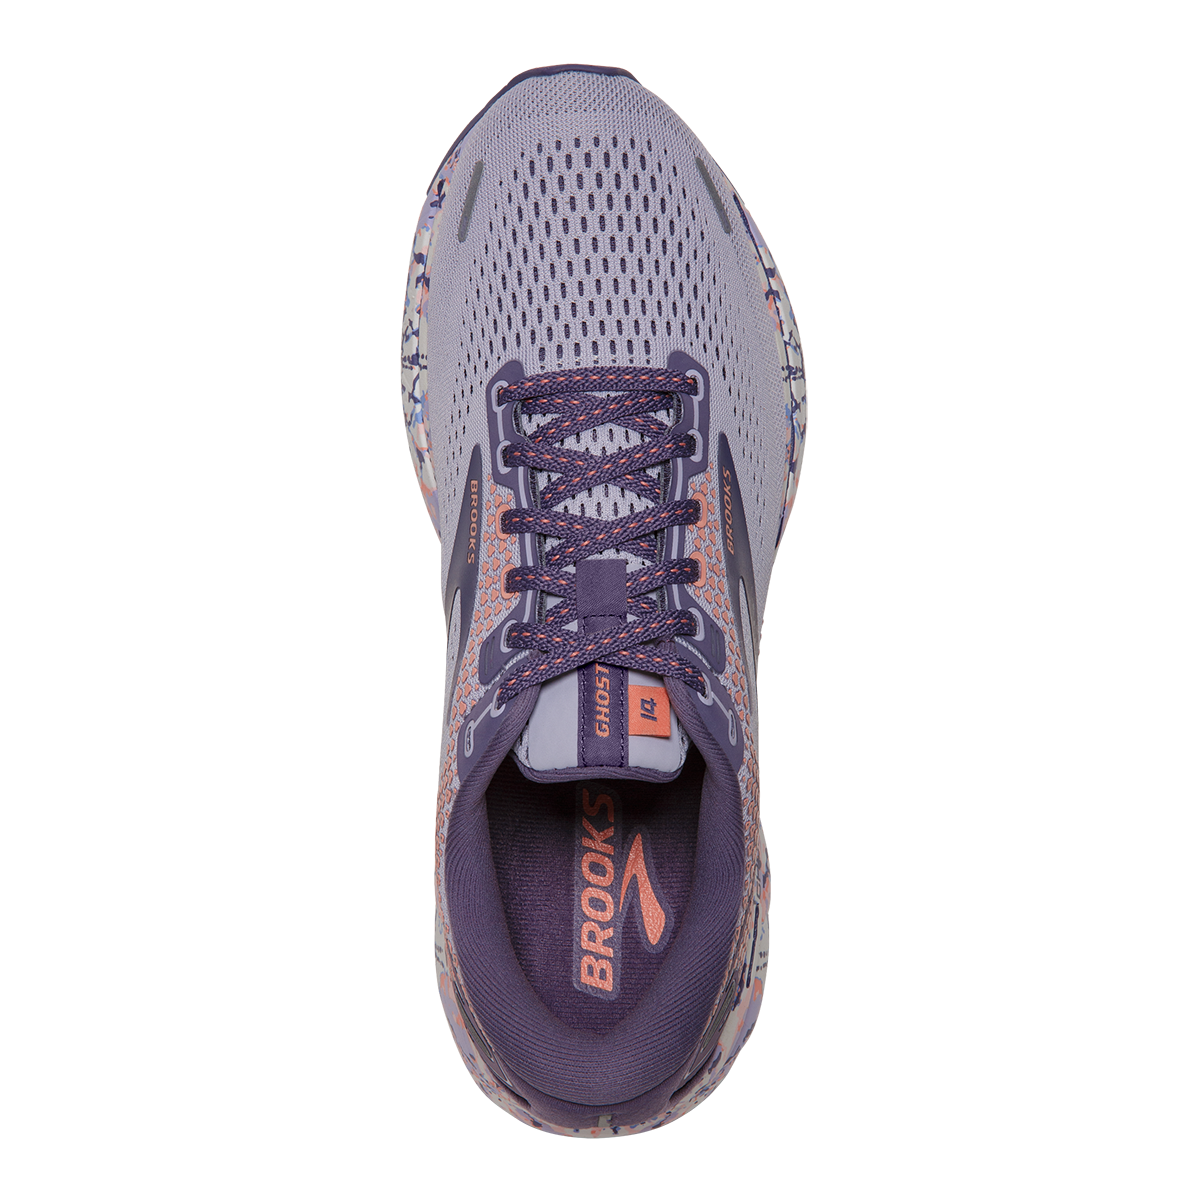 Brooks Ghost 14 Delicate Dyes, , large image number null